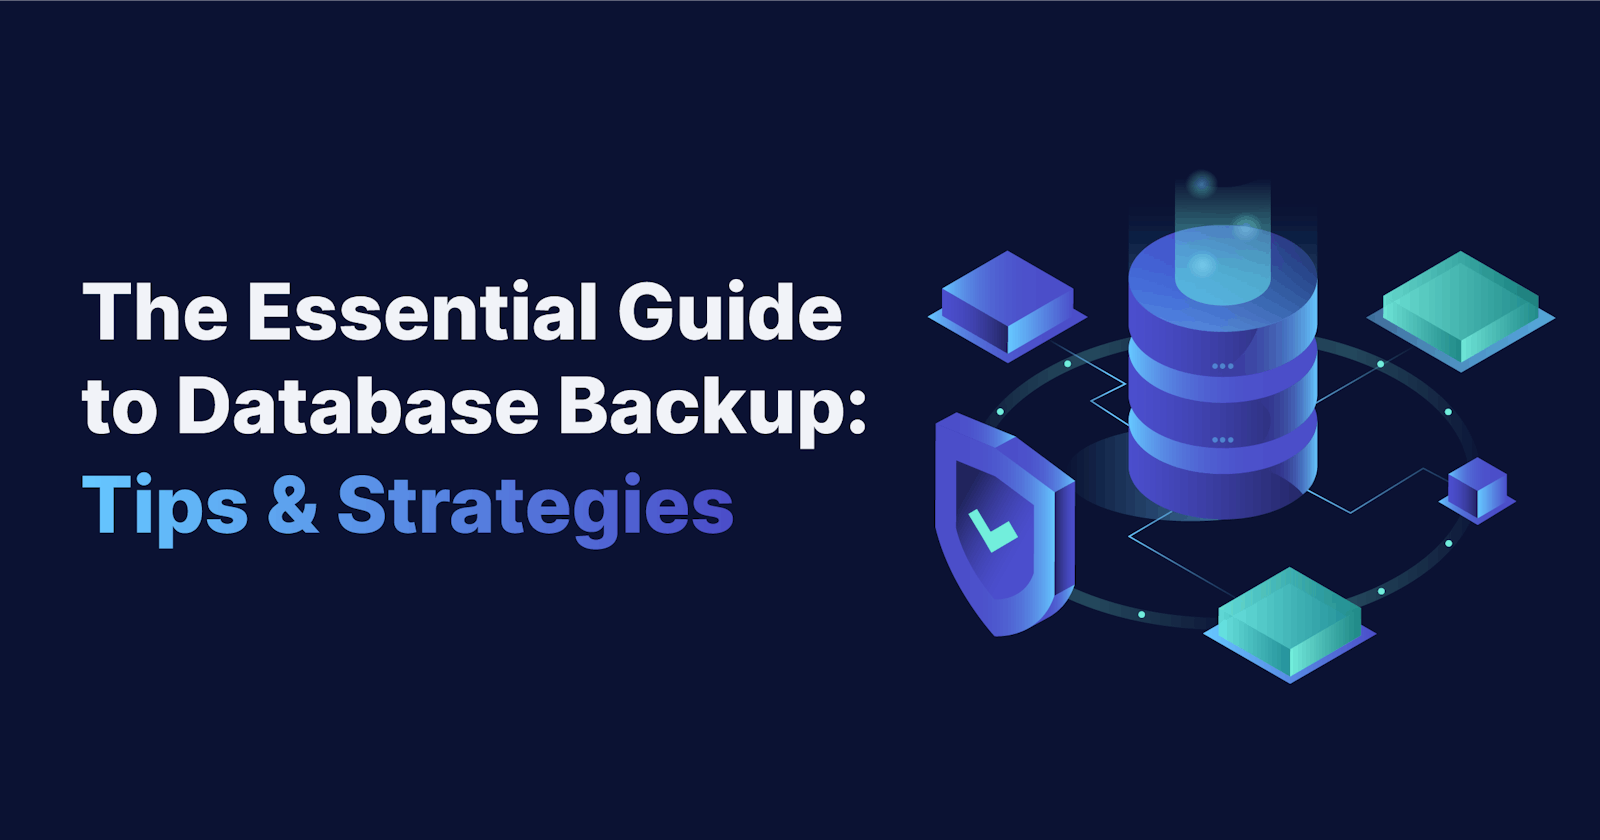 The Essential Guide to Database Backup: Tips & Strategies